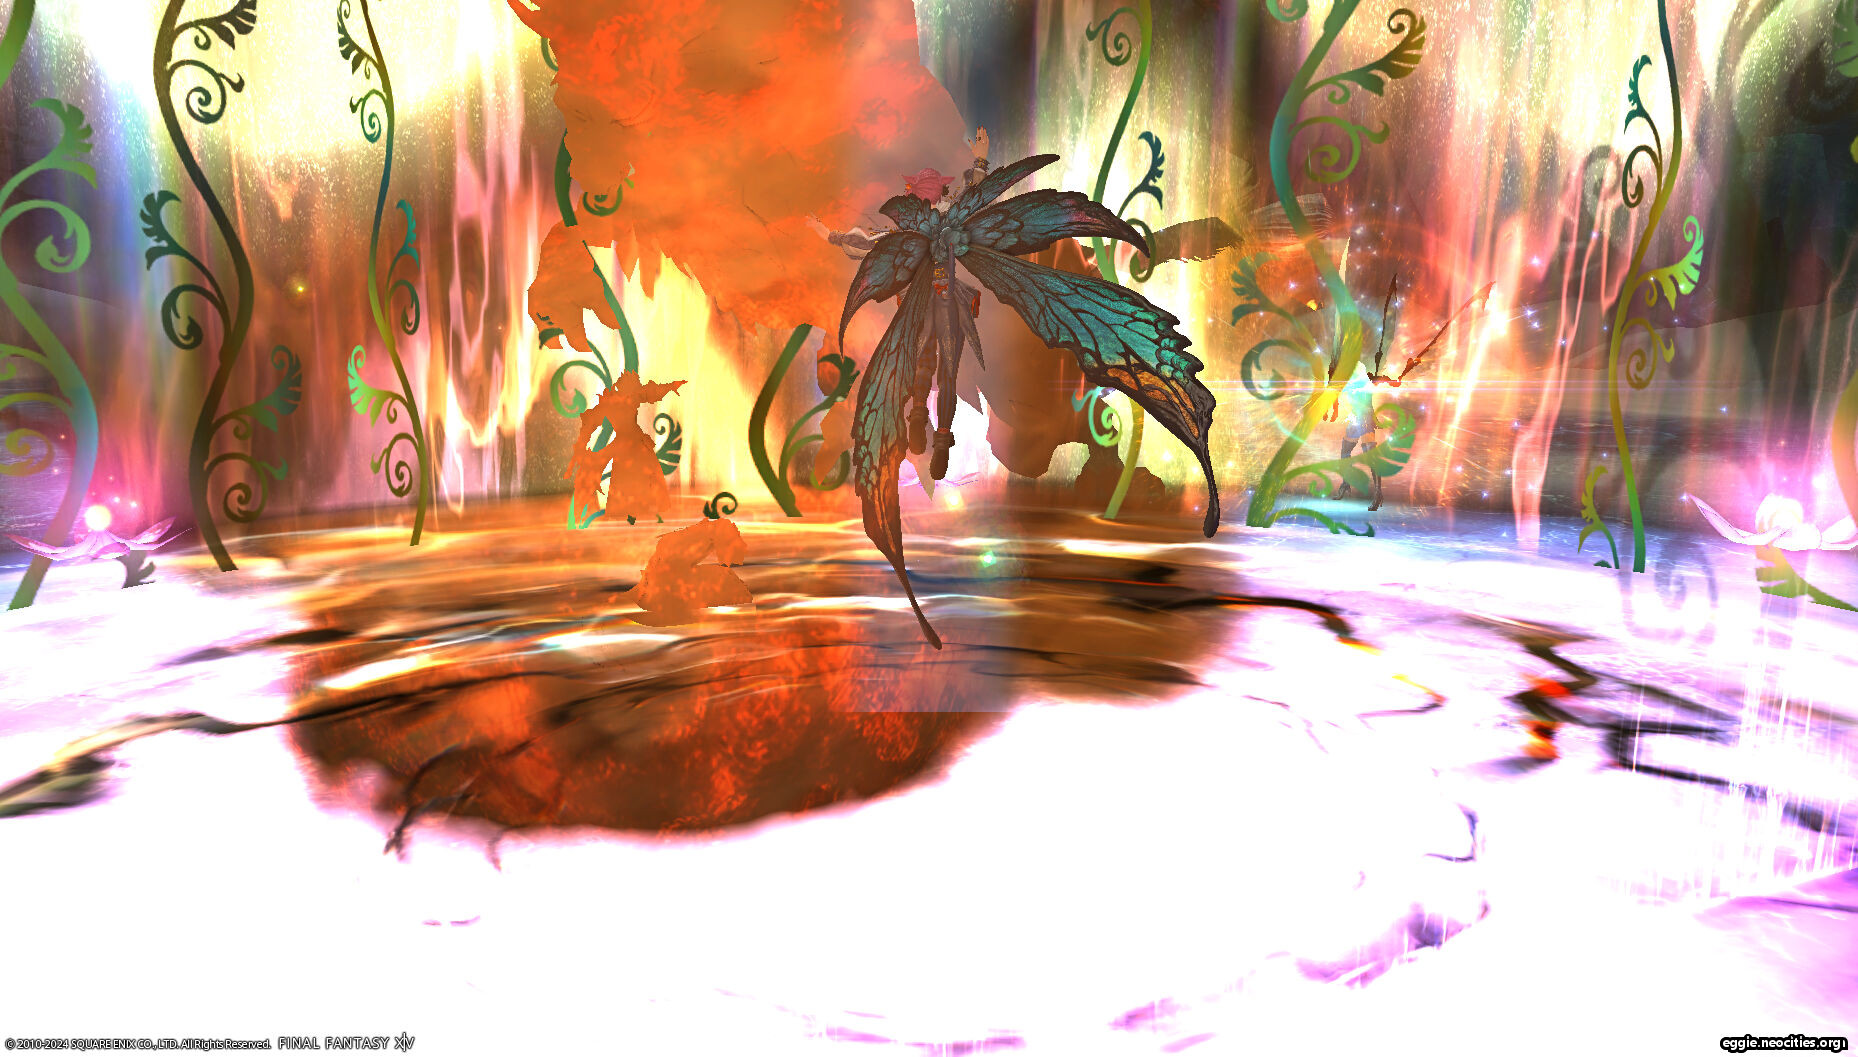 Zel casting Being Mortal, displaying the Titania wings